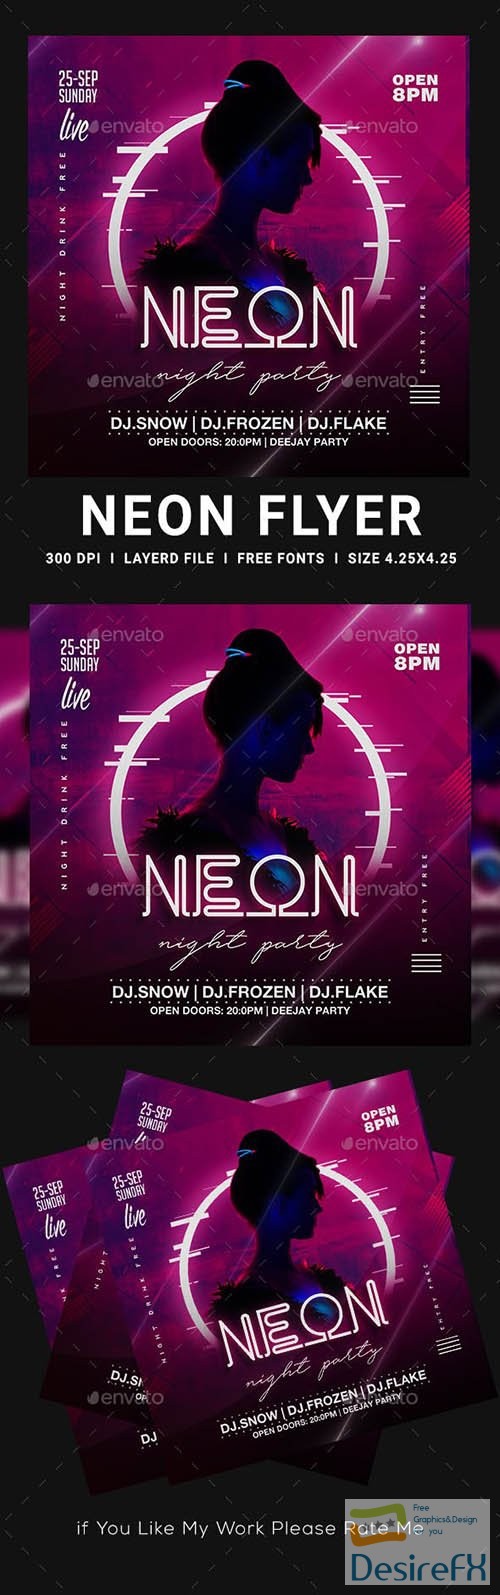 GraphicRiver - Neon Party Flyer 23537729